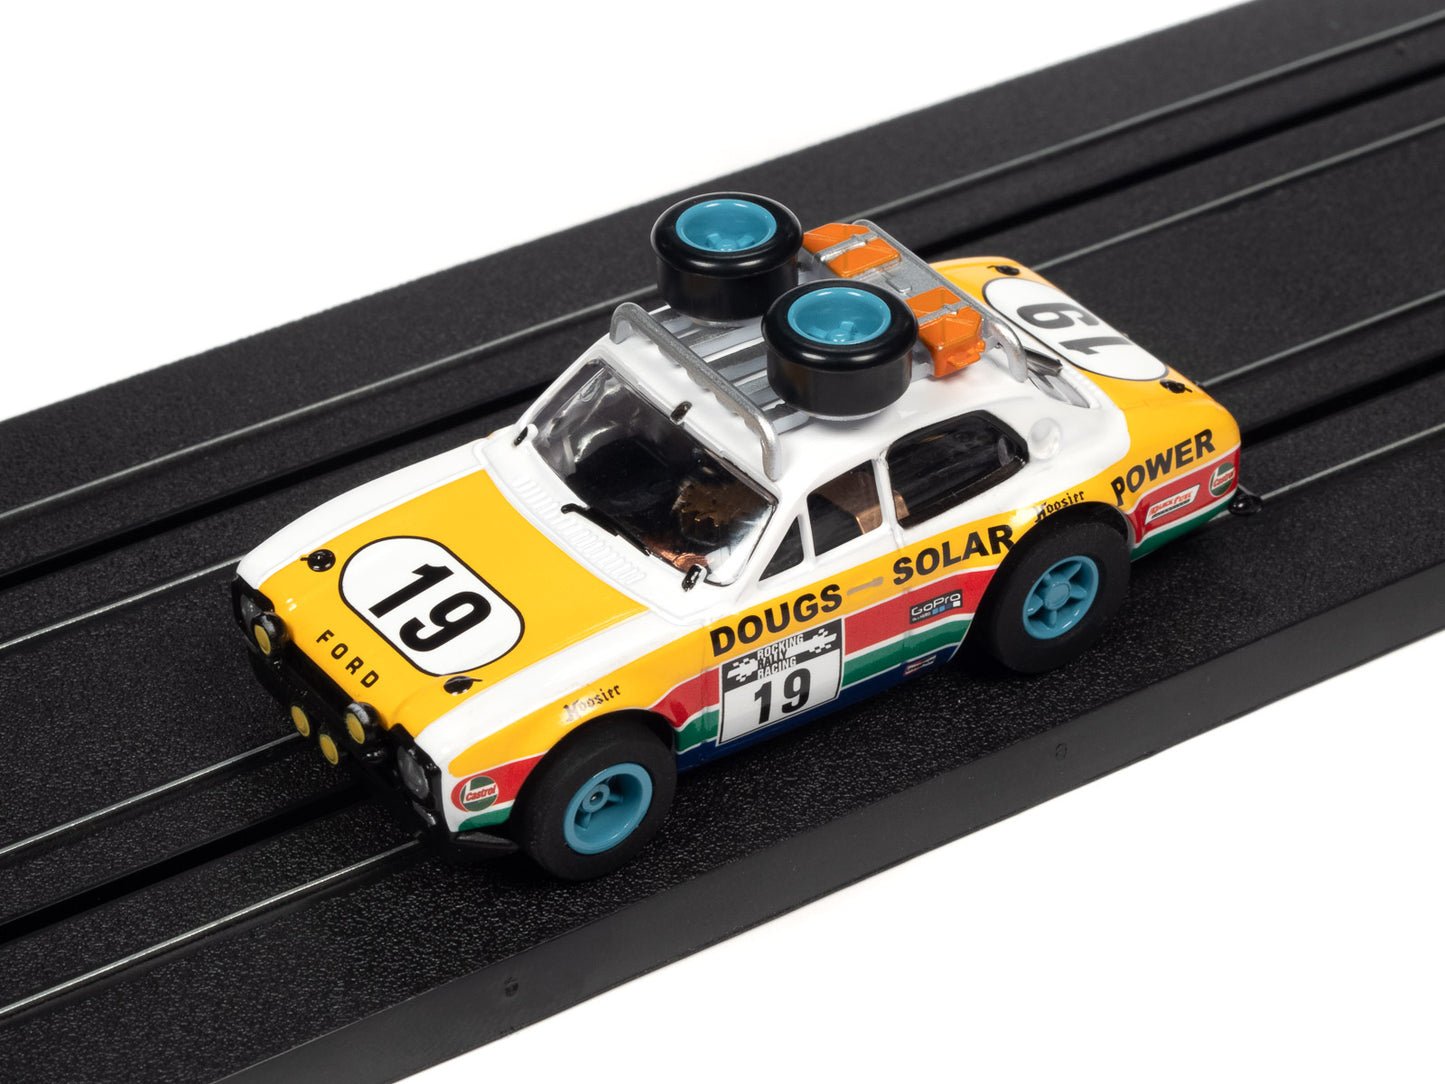 1975 Ford Escort (Yellow/Red/Green) H.O. Scale Slot Car, Xtraction Chassis